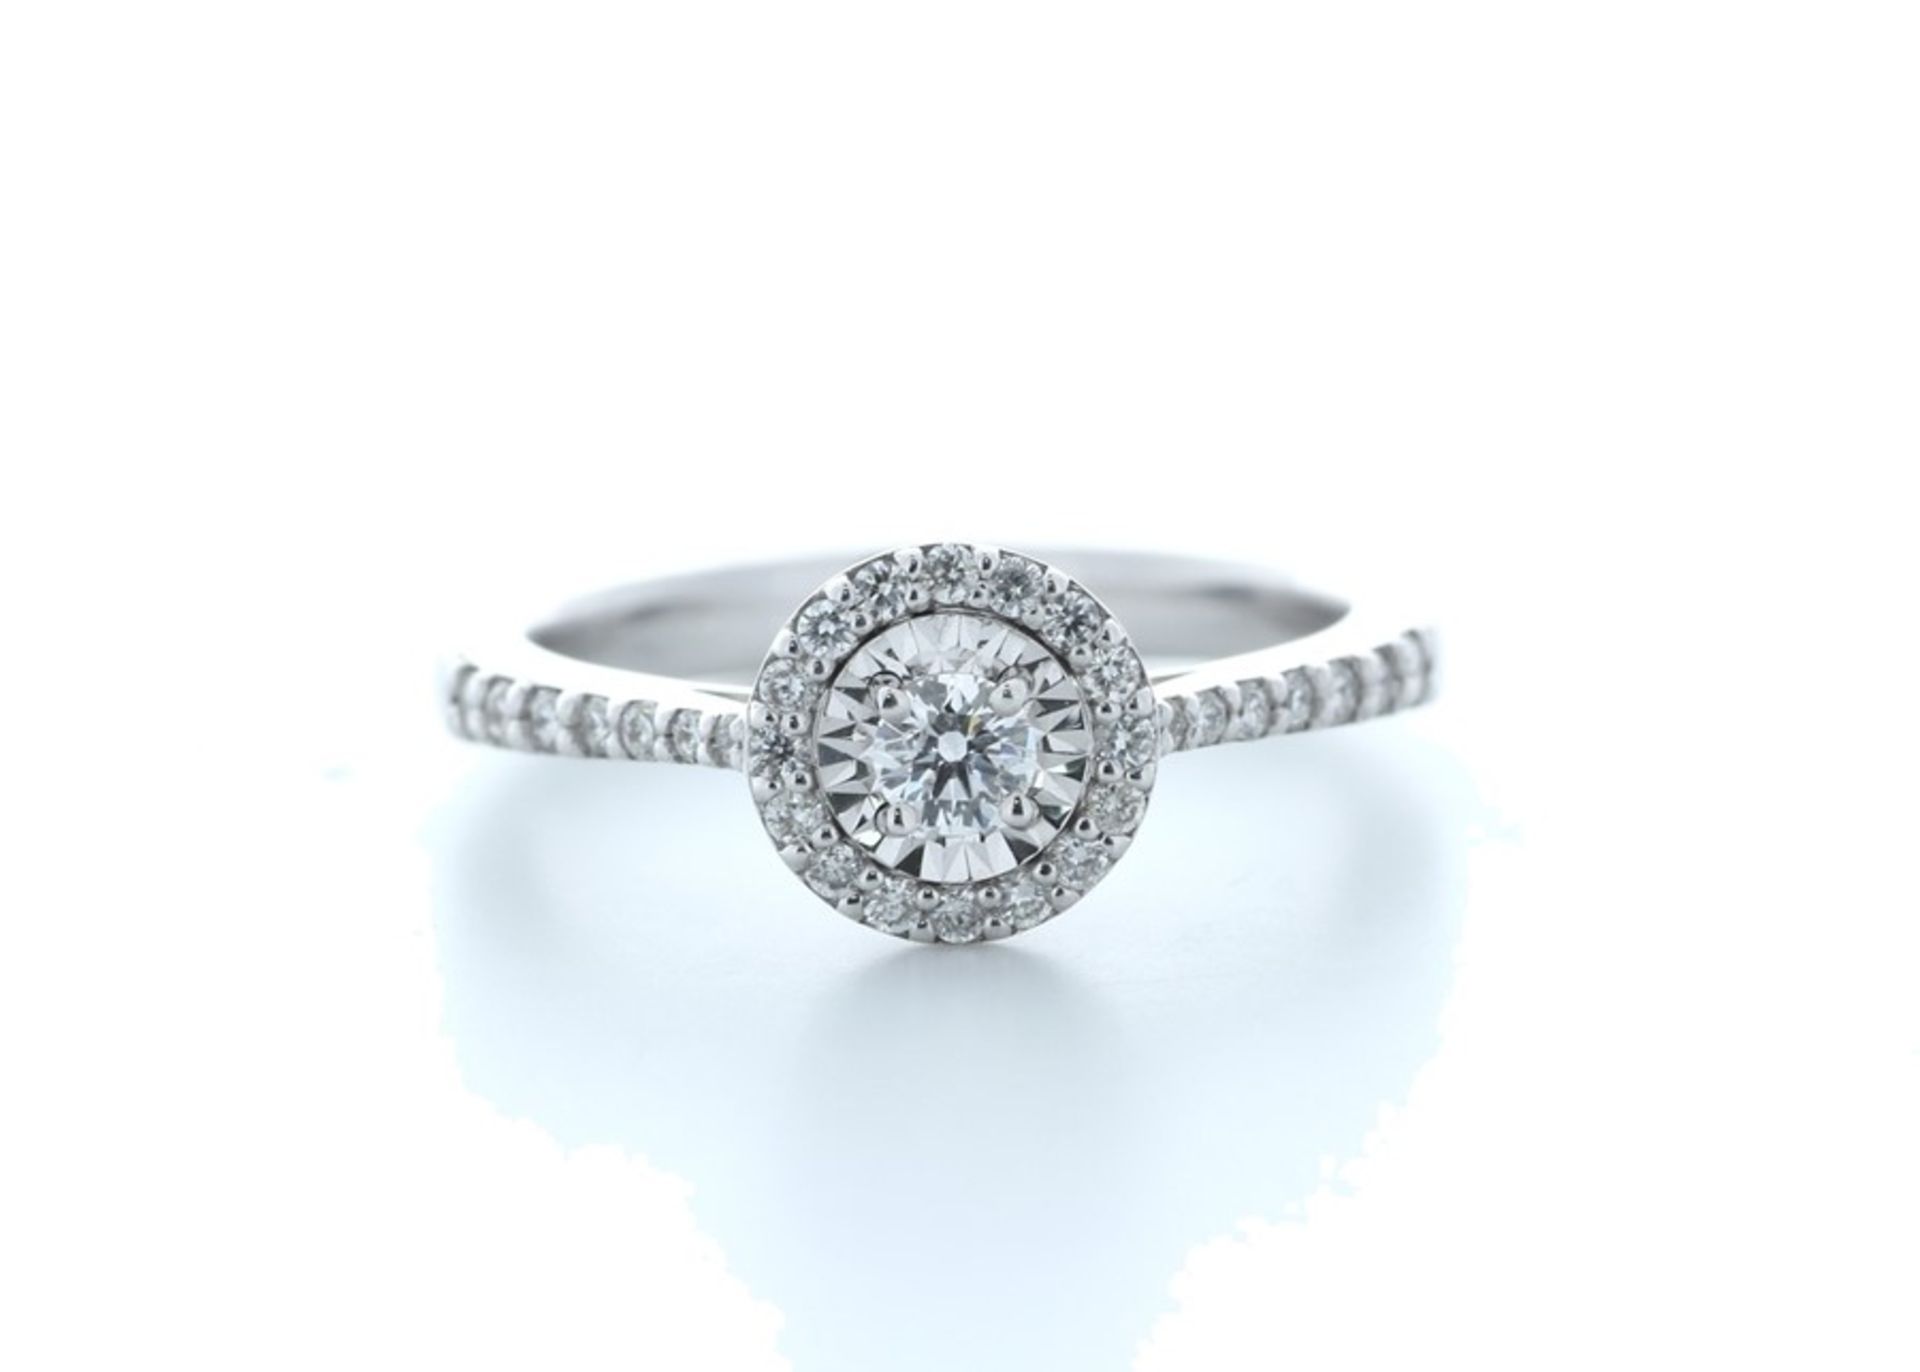 18ct White Gold Single Stone With Halo Setting Ring Valued by IDI £3,500.00